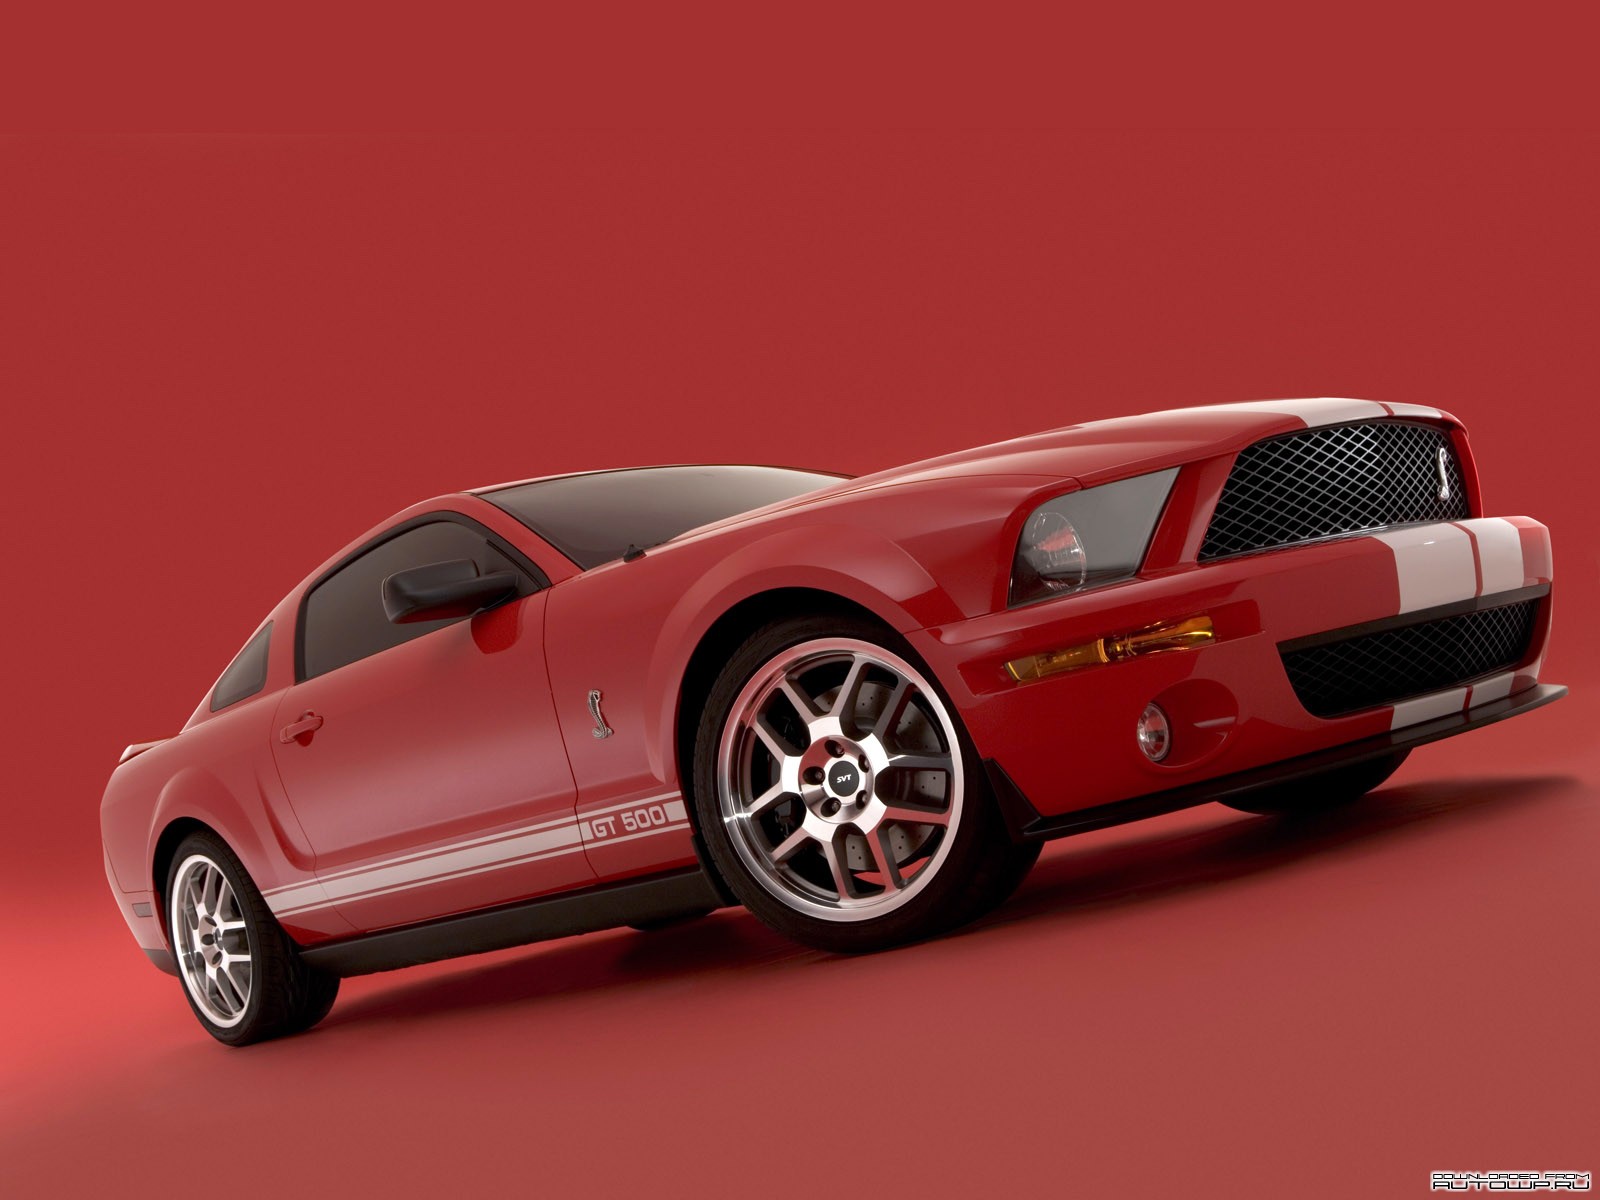 General 1600x1200 car Ford Mustang red cars Ford red red background vehicle Ford Mustang S-197 American cars muscle cars